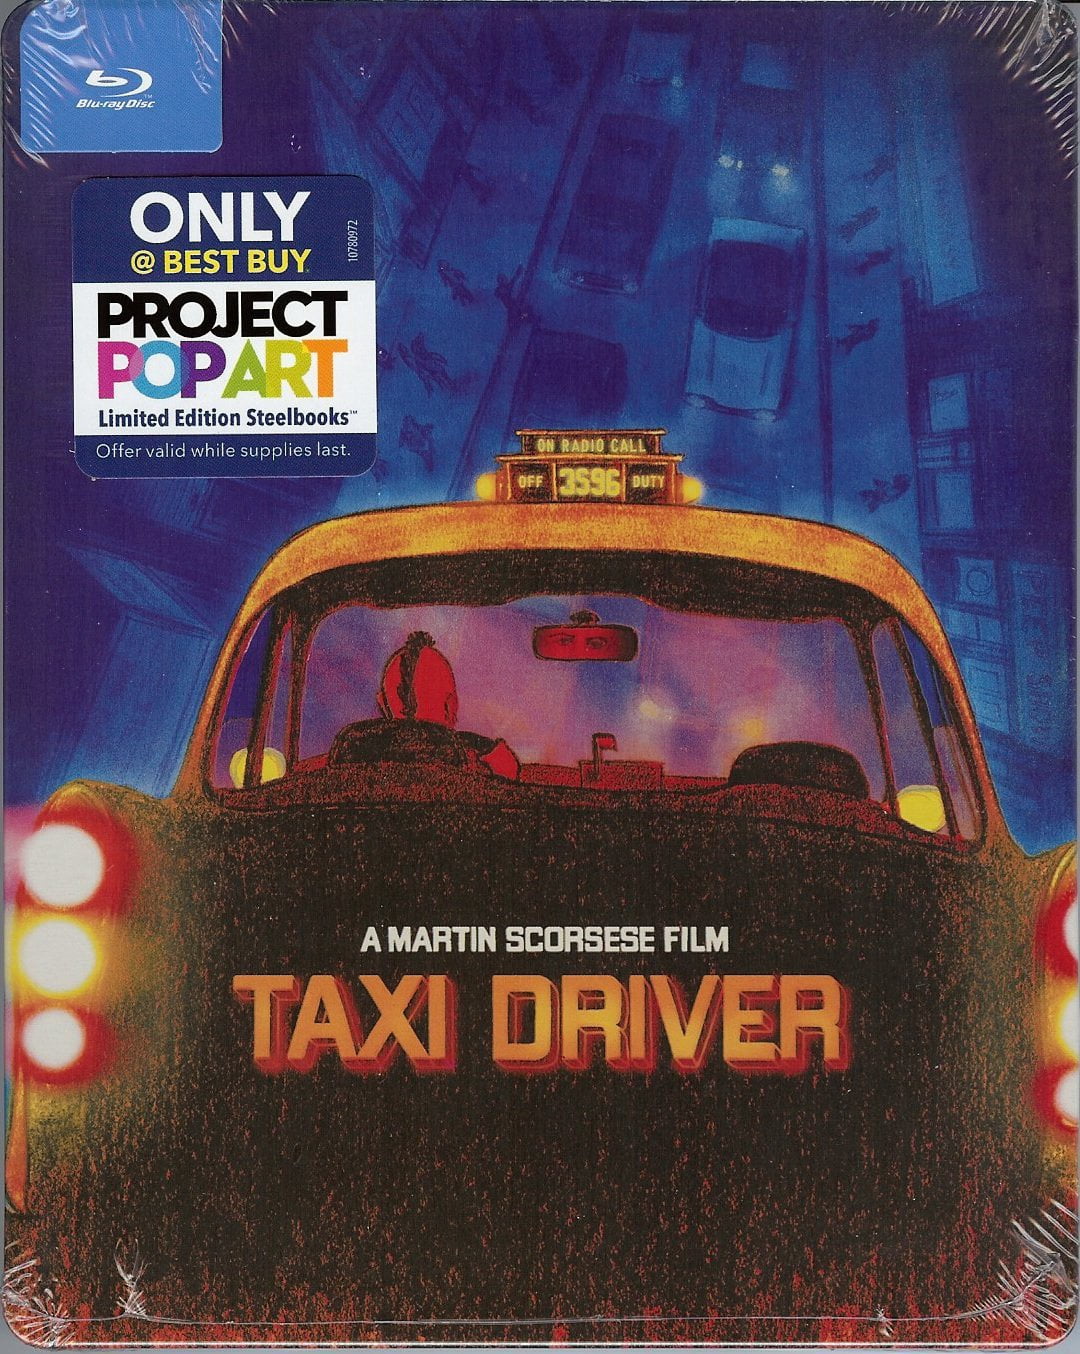 Taxi Driver Steelbook (Blu-ray Sony Pictures)